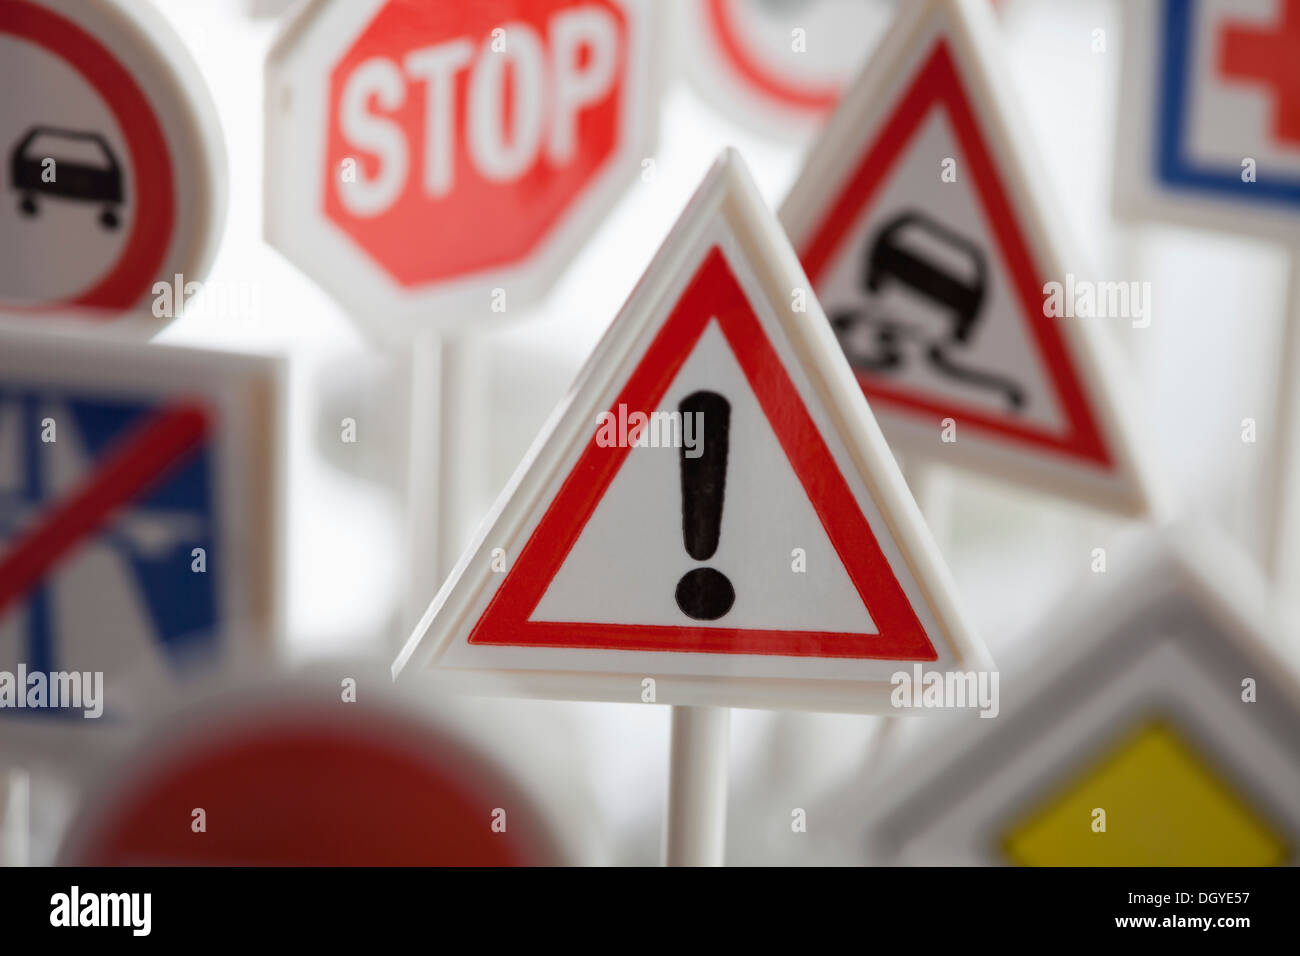 A toy hazard sign surrounded by other various road warning signs Stock Photo